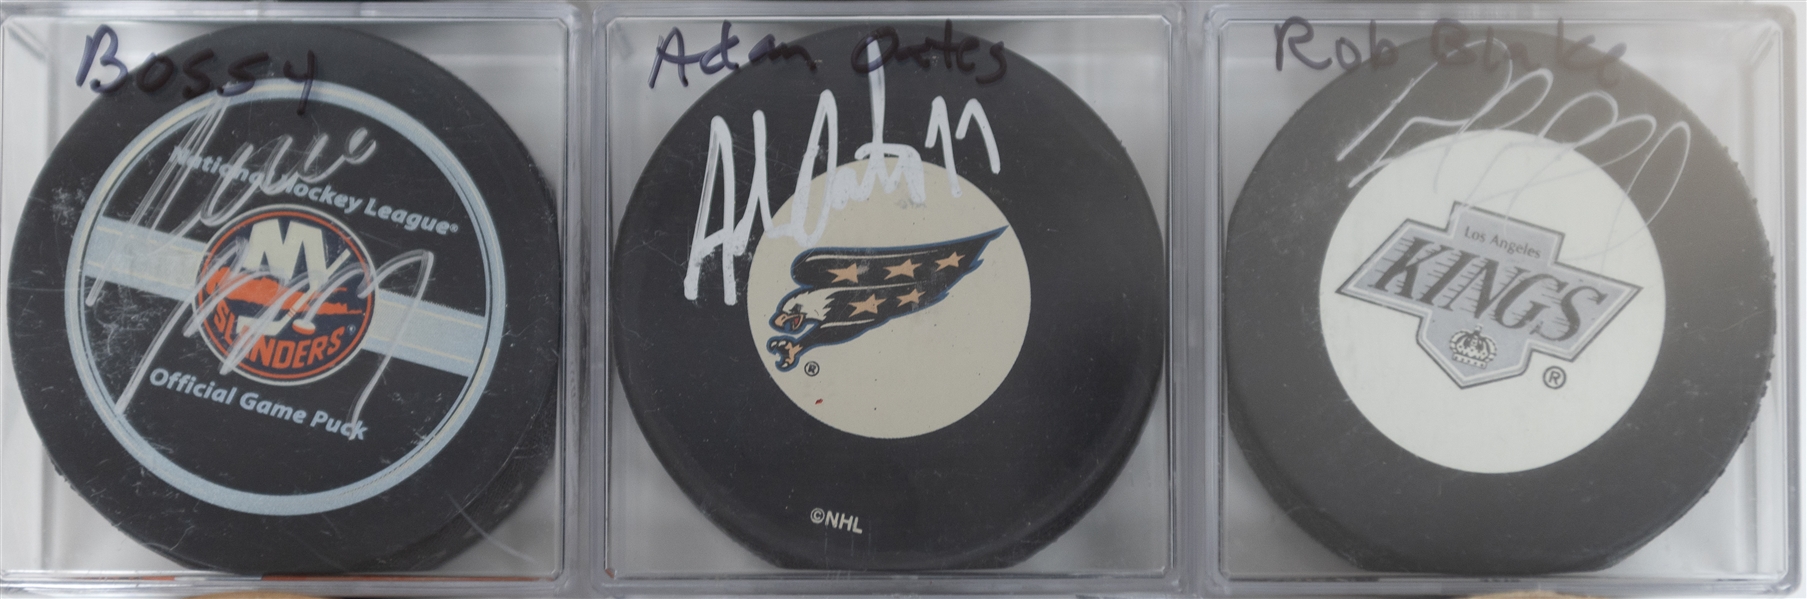 Lot of 9 Signed Hockey Pucks (Mike Bossy, Ray Bourque, Adam Oates, Rob Blake, Mike Knuble, +4) - JSA Auction Letter